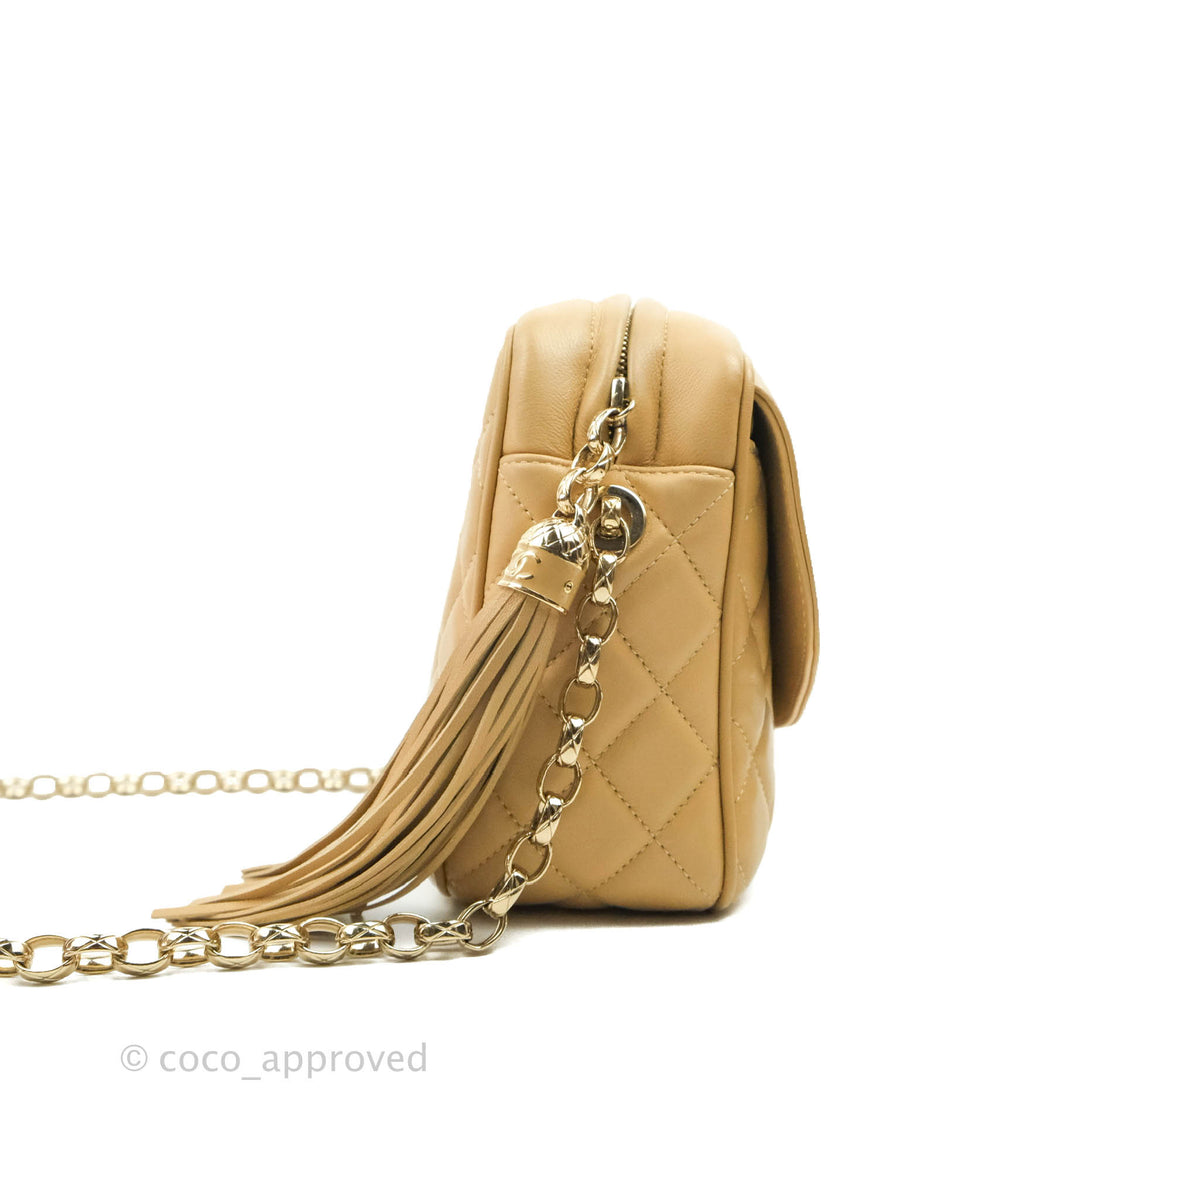 Chanel Camera Bag Beige with gold chains